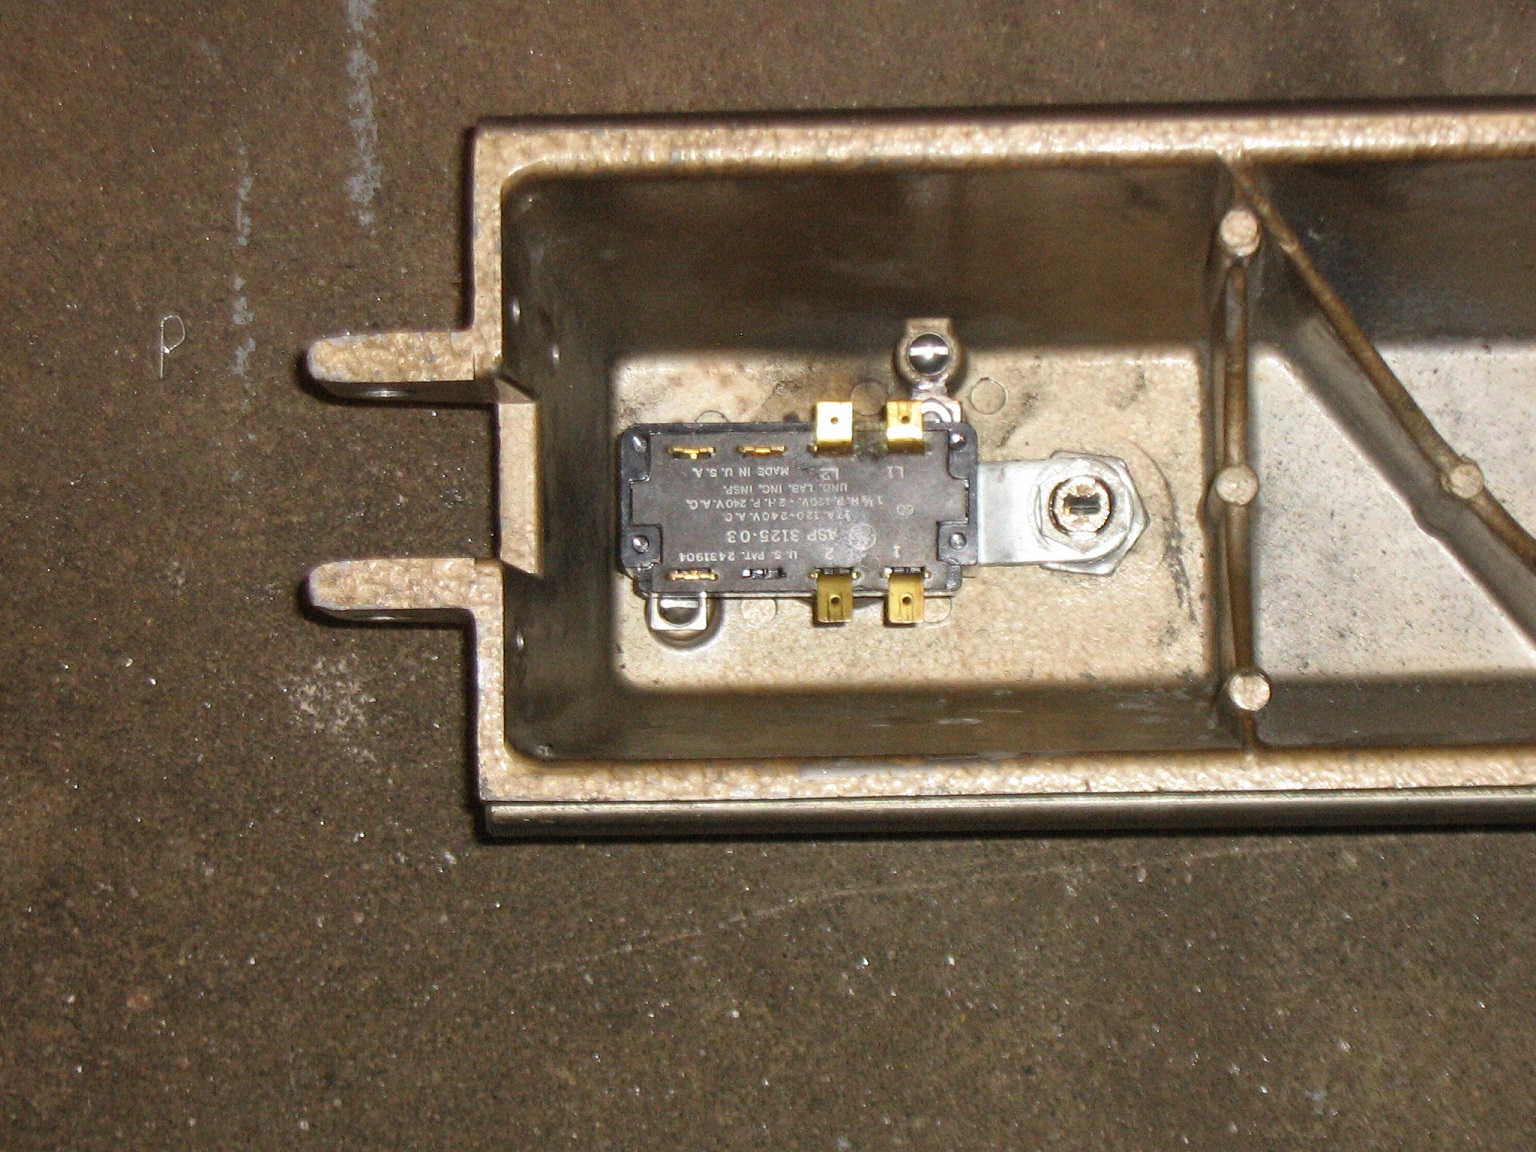 Sawsmith Switch &amp; Lock in Locked Position